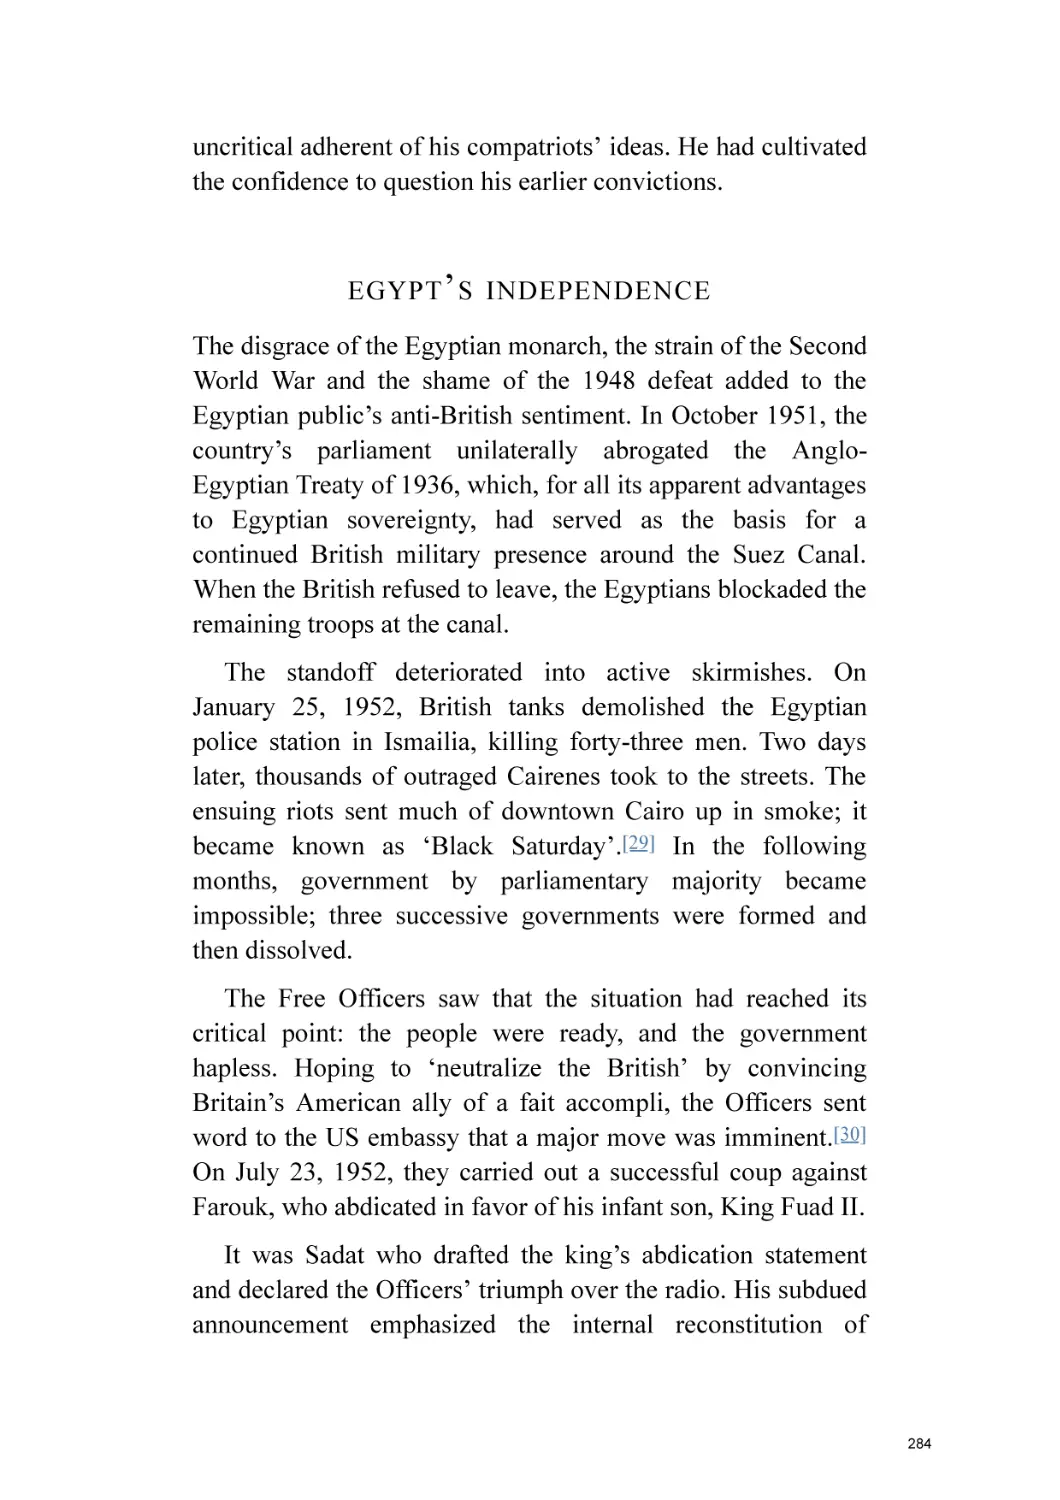 Egypt’s Independence